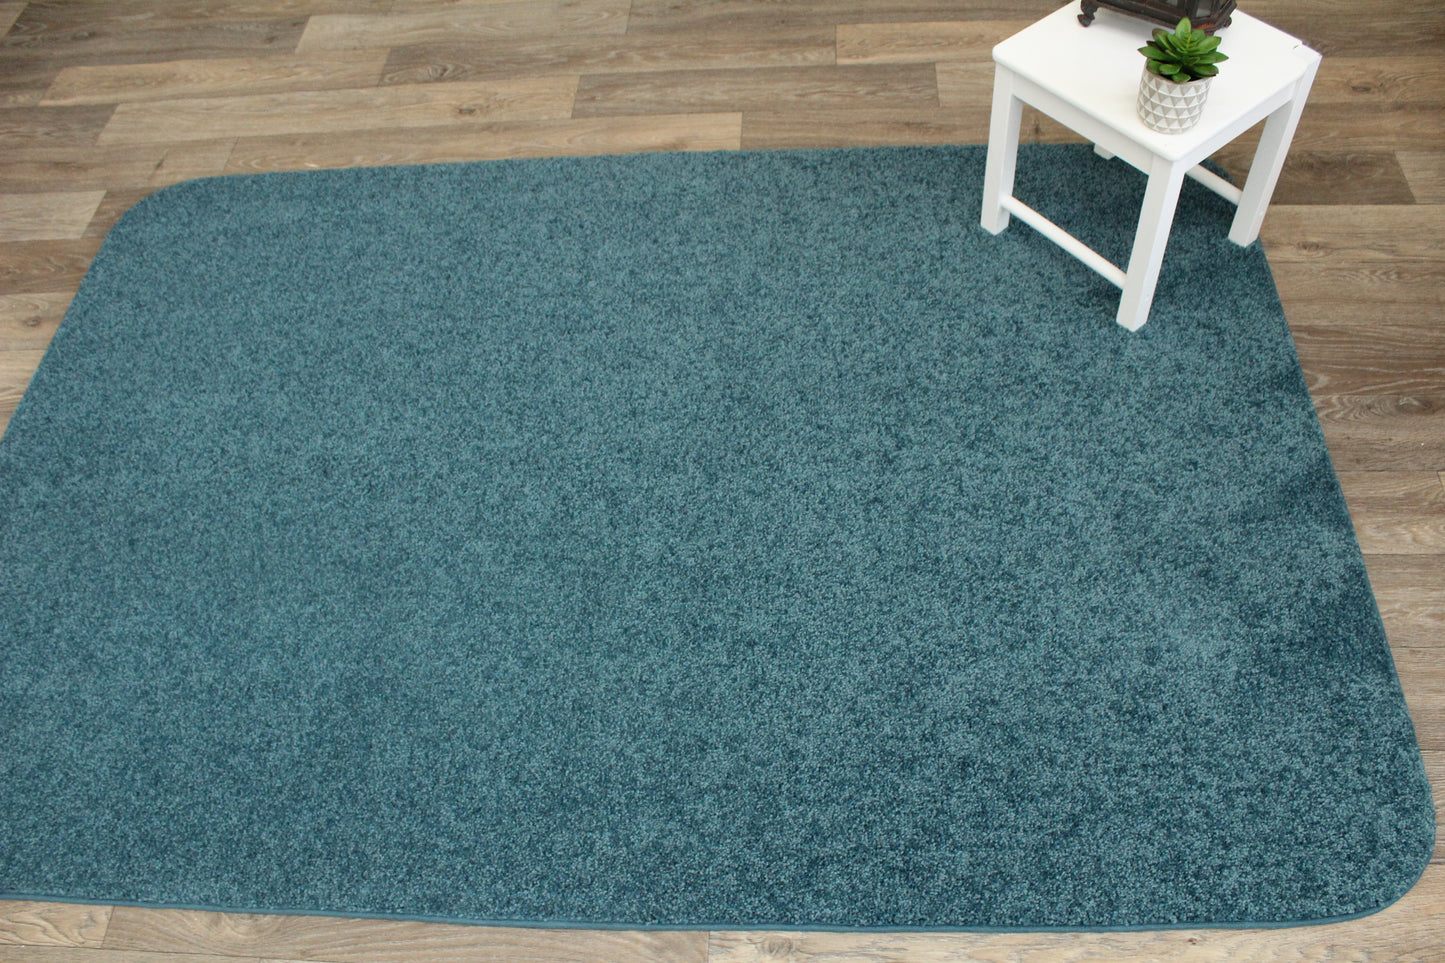 Mermaid Teal Area Rug with side table